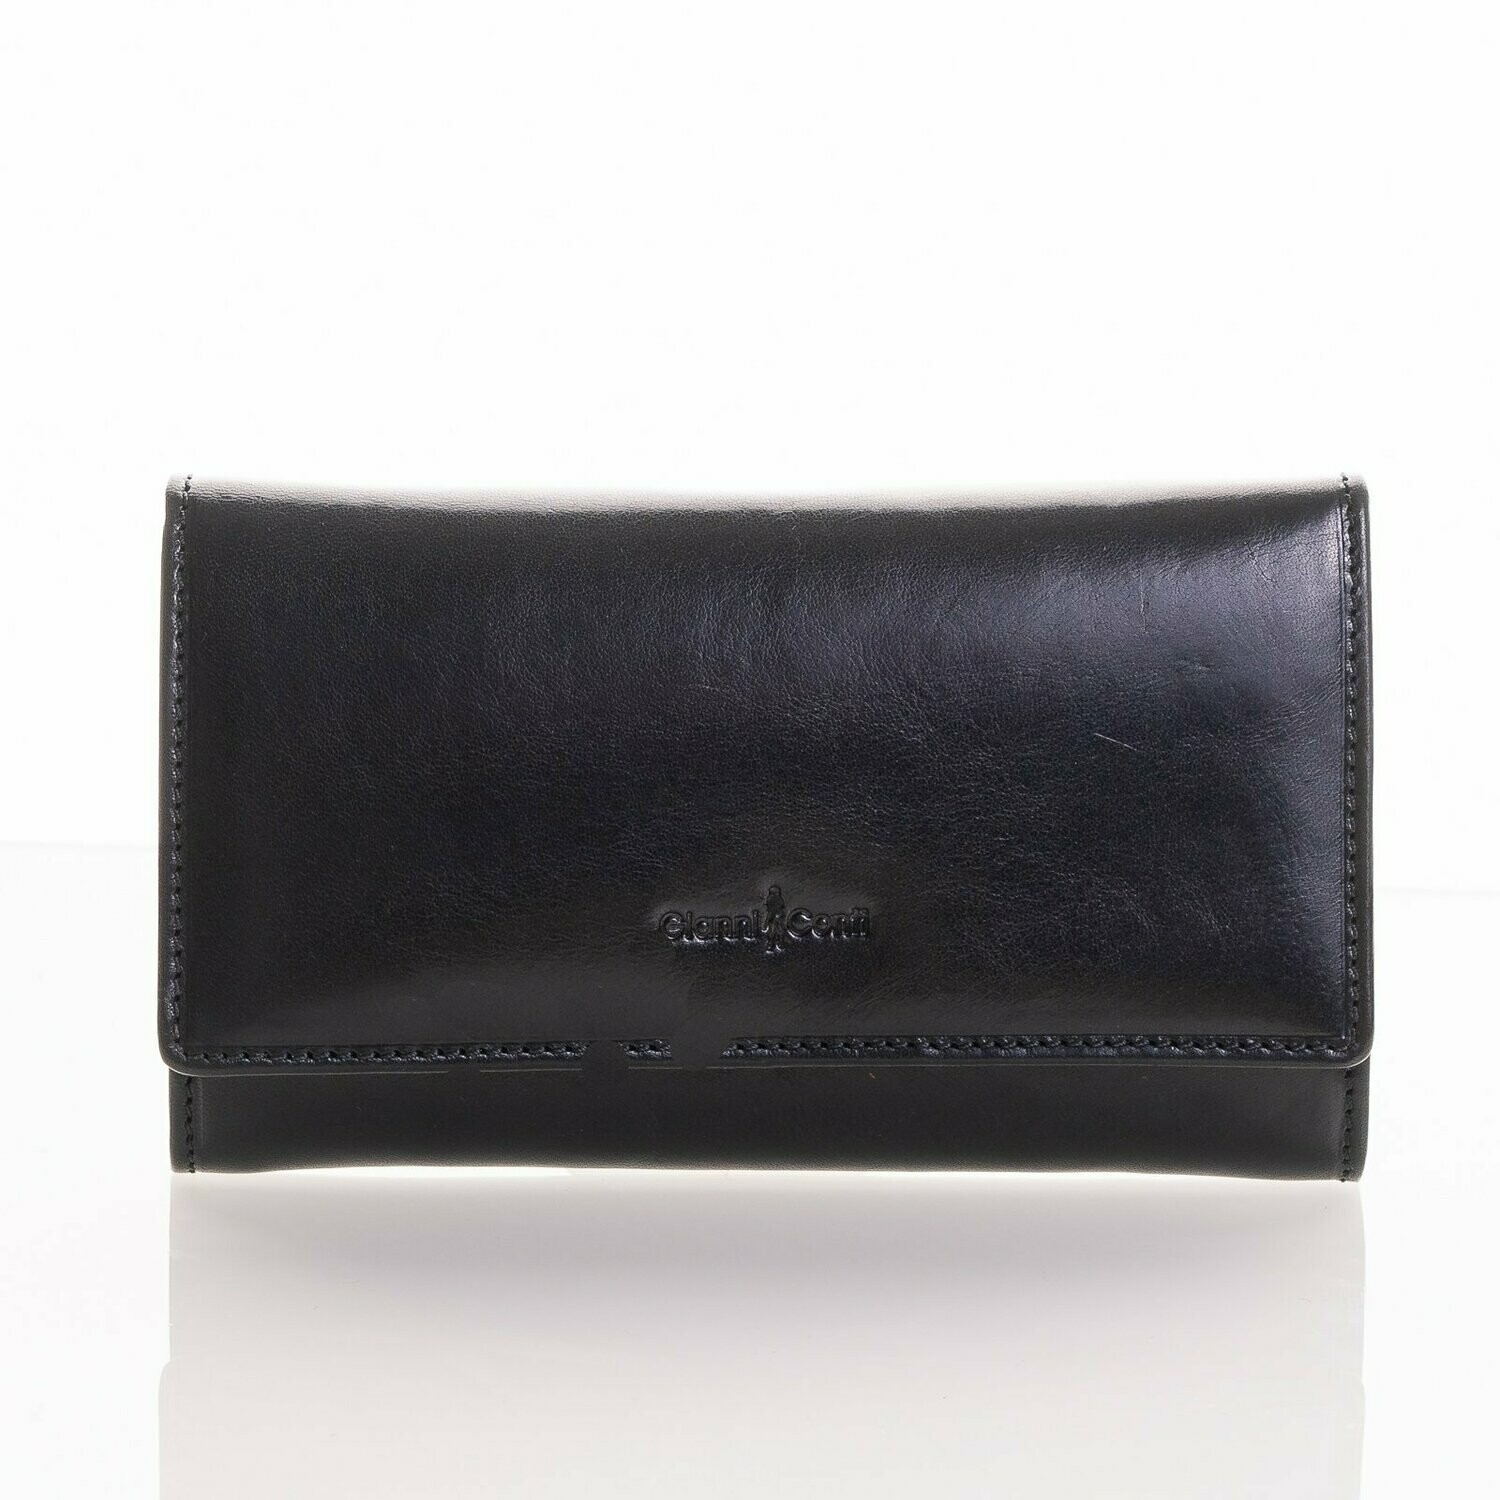 Gianni Conti Flap Front Matinee Purse